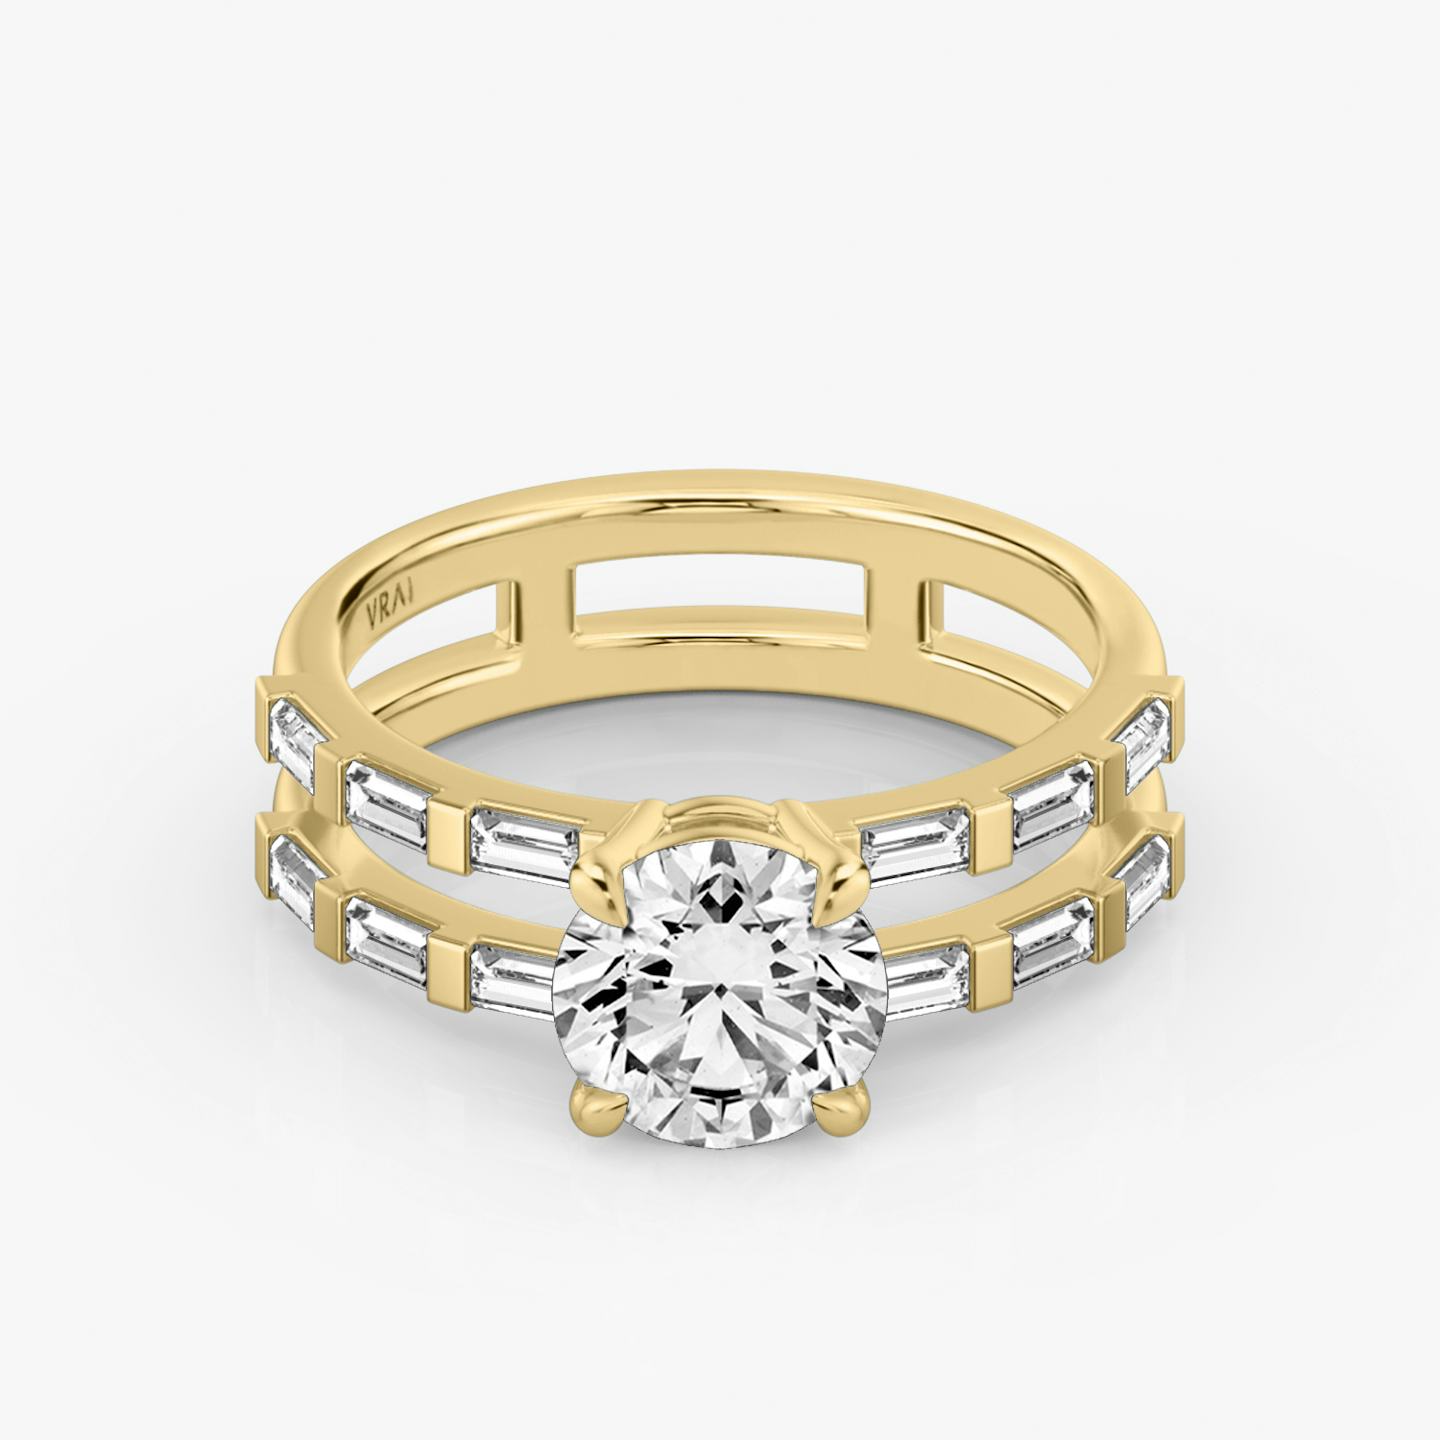 The Double Band | Round Brilliant | 18k | 18k Yellow Gold | Band: Pavé | Carat weight: 1 | Band stone shape: Baguette | Diamond orientation: vertical